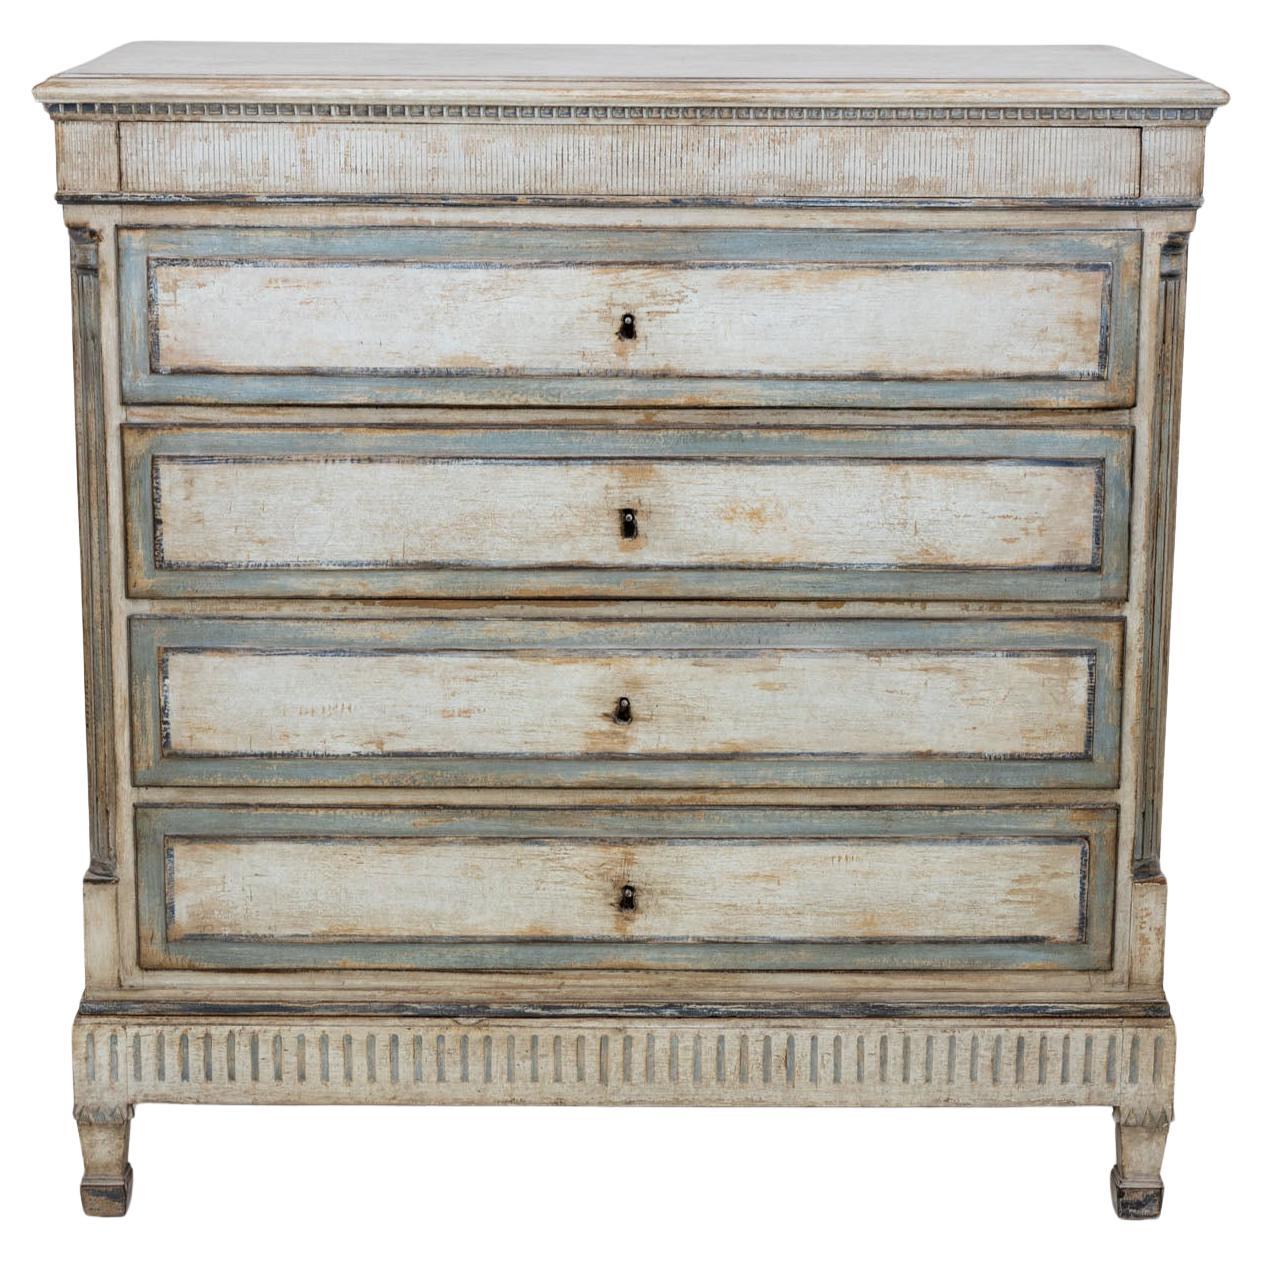 Neoclassical tall Chest of Drawers, Scandinavia, early 19th century For Sale